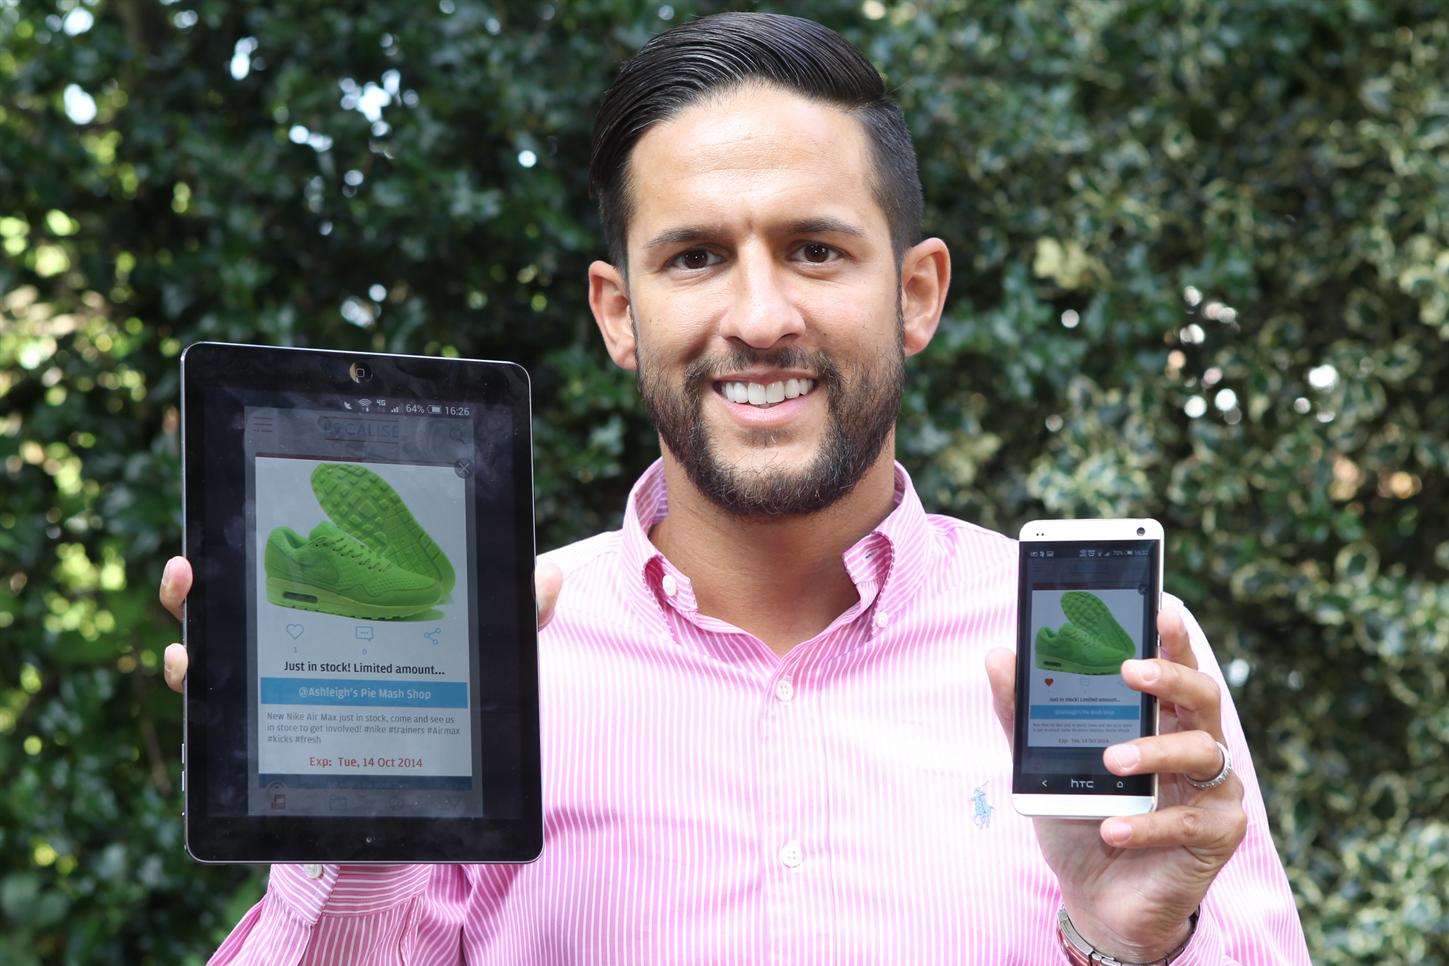 Ashleigh Cornelius, shows an app he has developed in Beta form on Apple and Android platforms, that he is preparing to launch before Christmas, to enable local business in maidstone to "push" pictures, videos and text to subscribers of the app letting them know of their latest events and business news